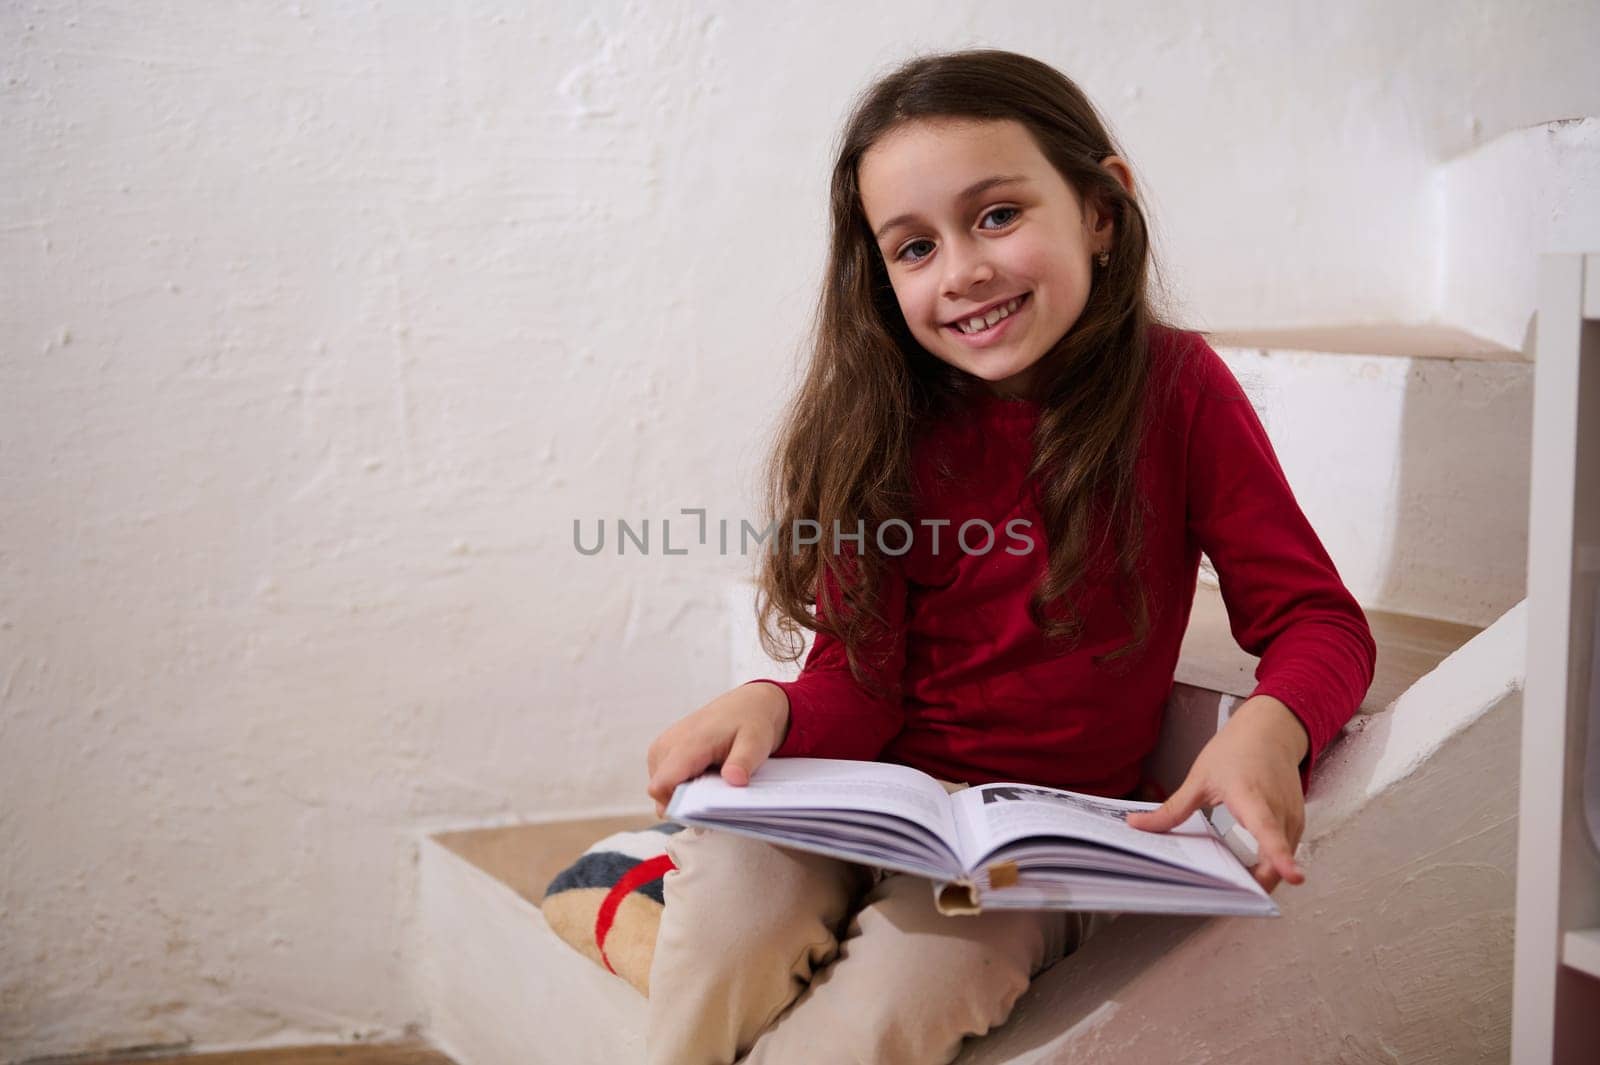 Authentic portrait of an adorable child girl holding book, smiling looking at camera, sitting on steps at home by artgf